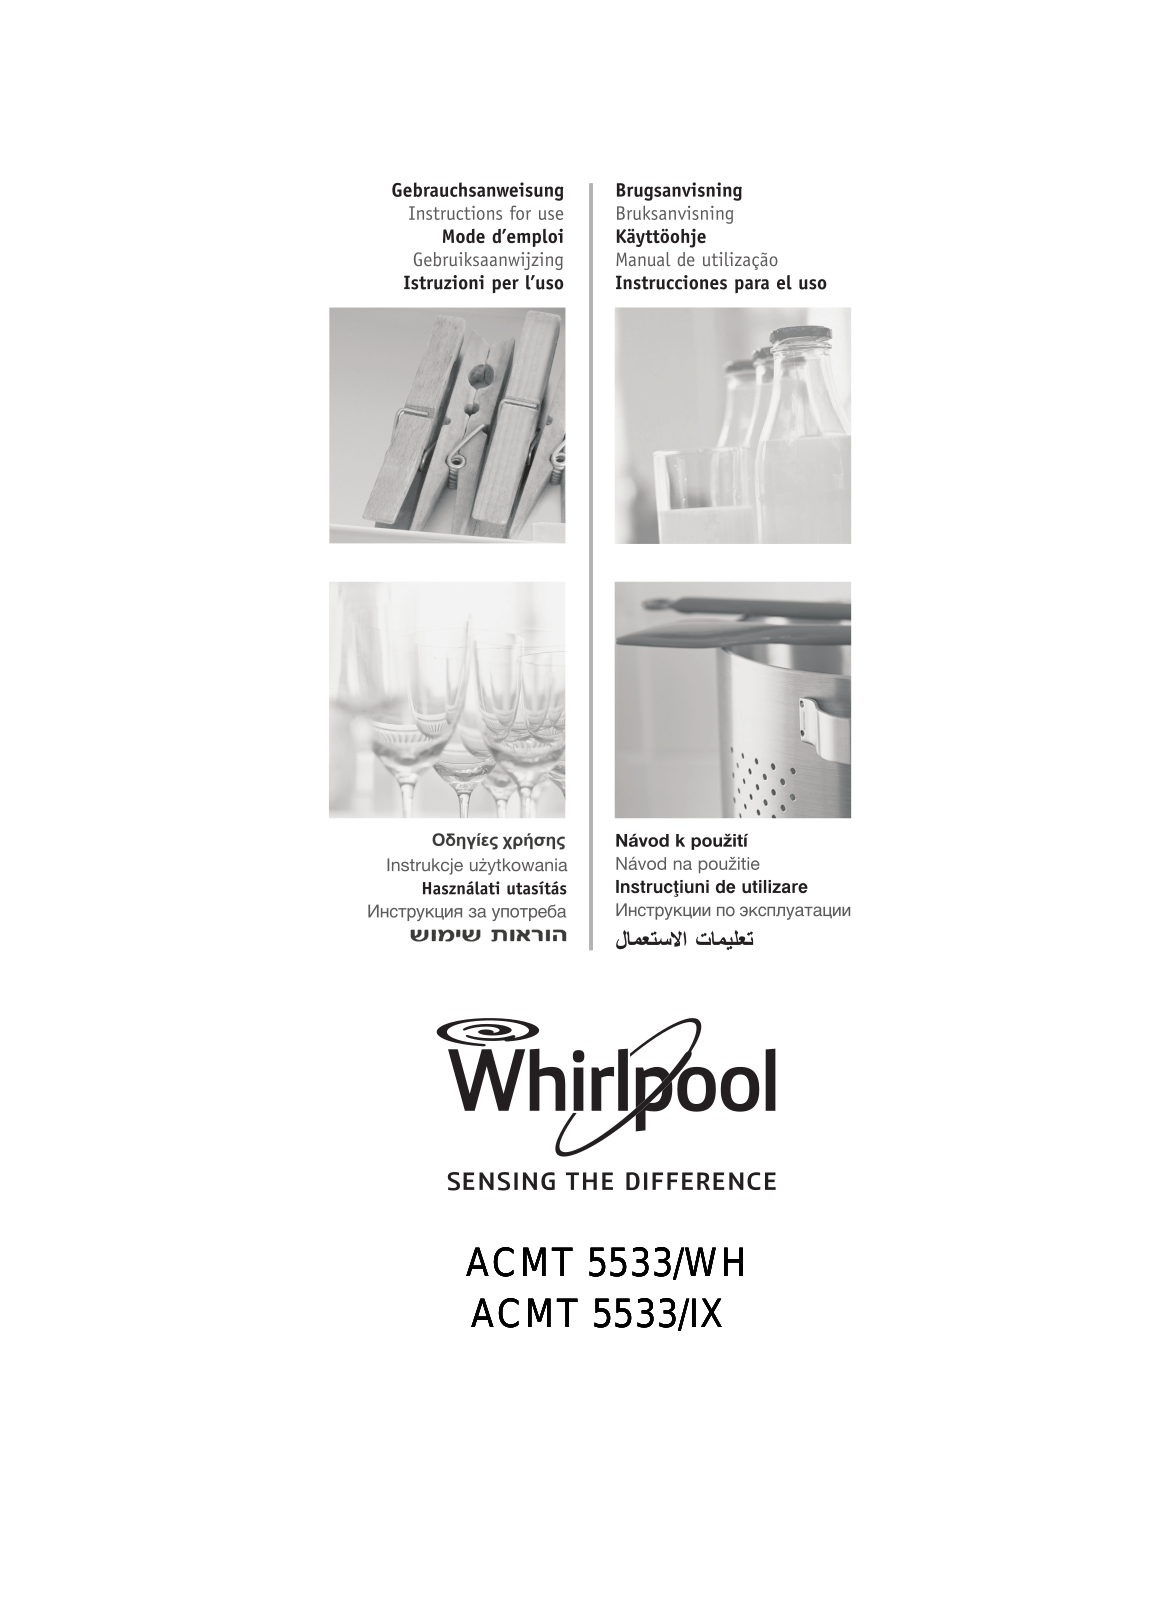 WHIRLPOOL ACMT 5533/WH User Manual